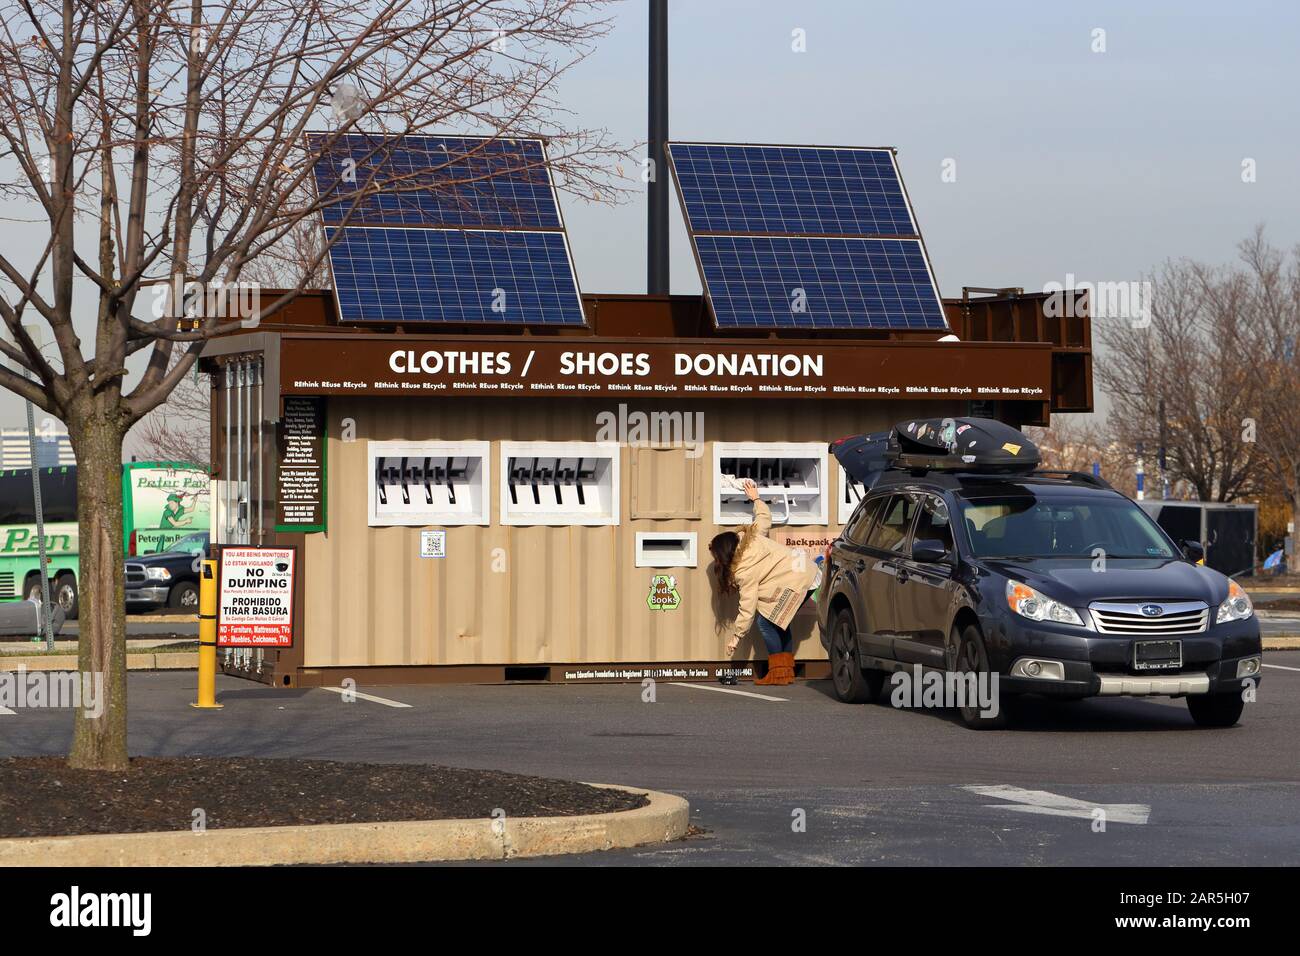 A person depositing items into a Green Education Foundation donation station equipped with solar panels at a shopping mall in Philadelphia, PA. Stock Photo